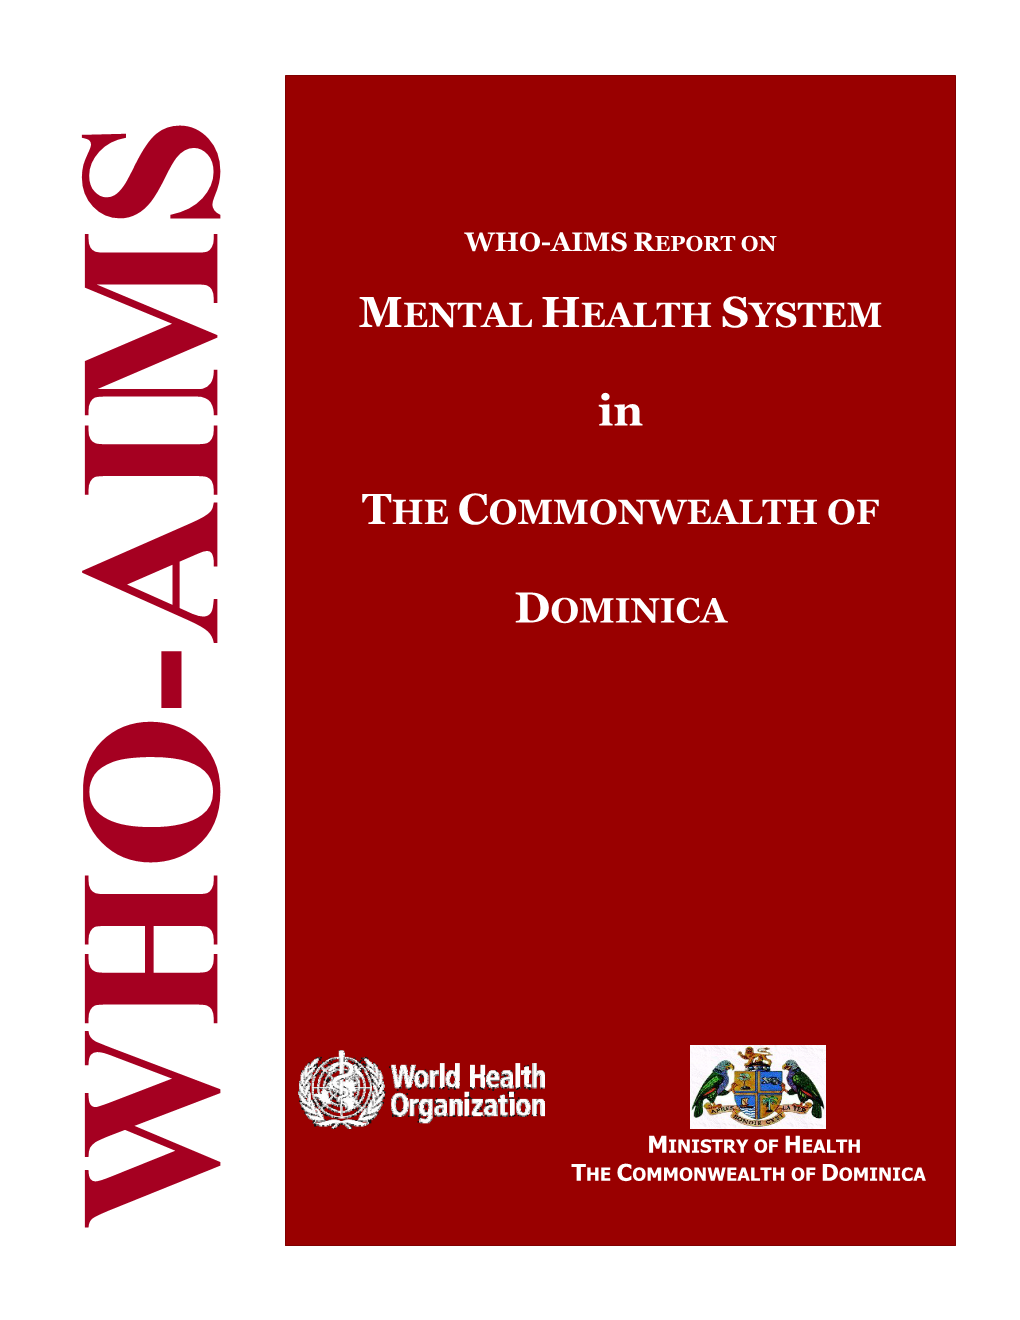 Mental Health System the Commonwealth of Dominica